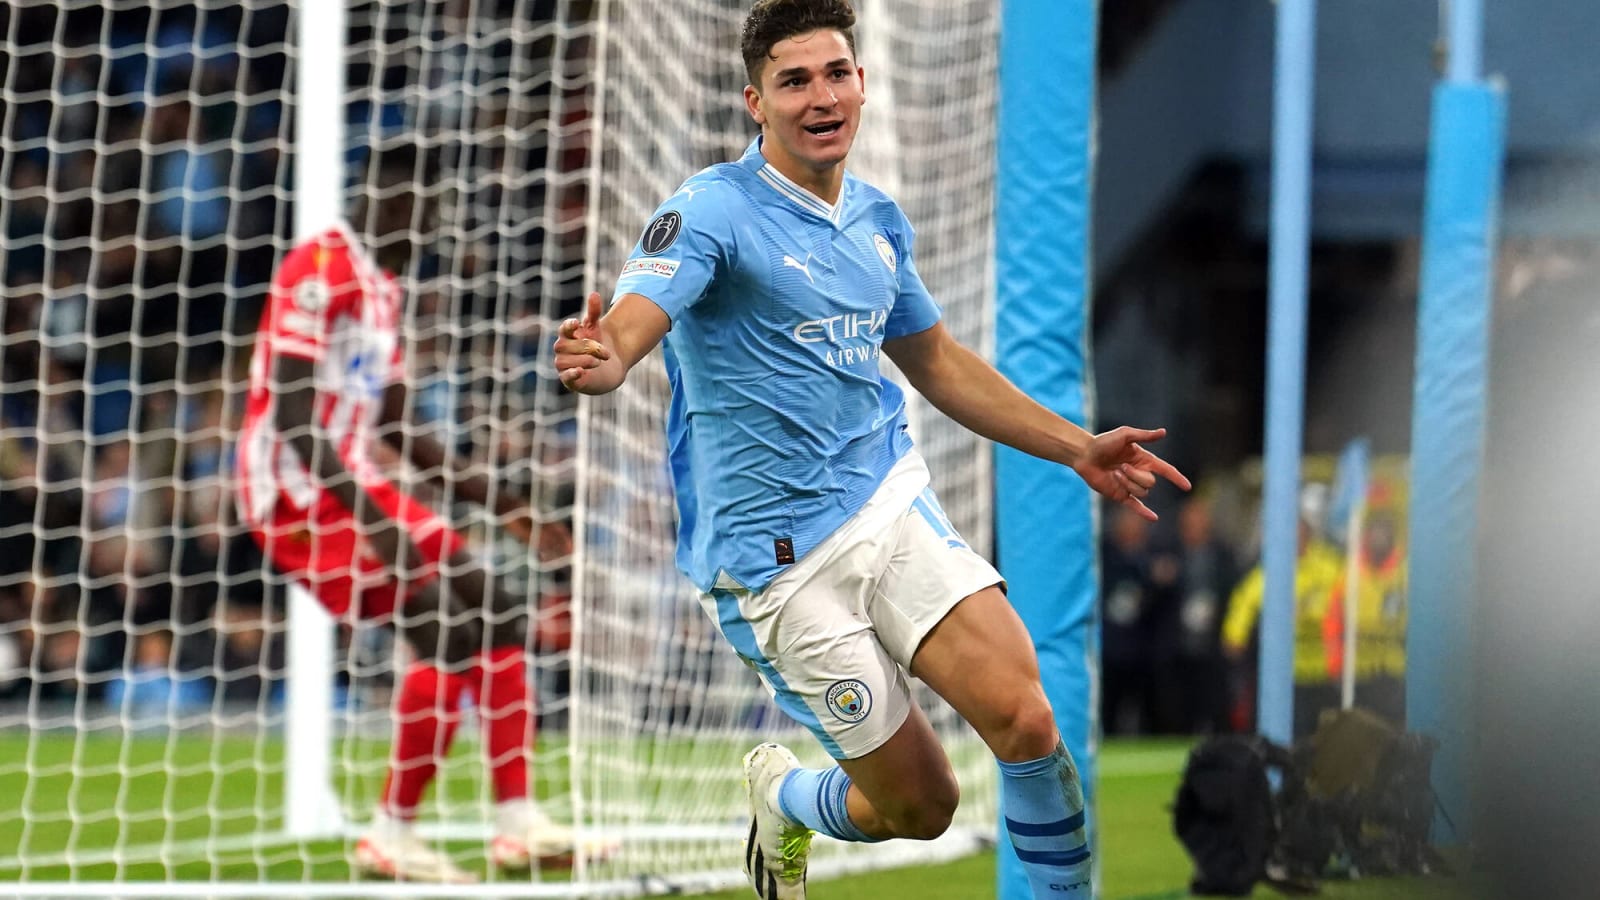 Watch: Julian Alvarez and Erling Haaland link up to draw Man City level with incredible goal